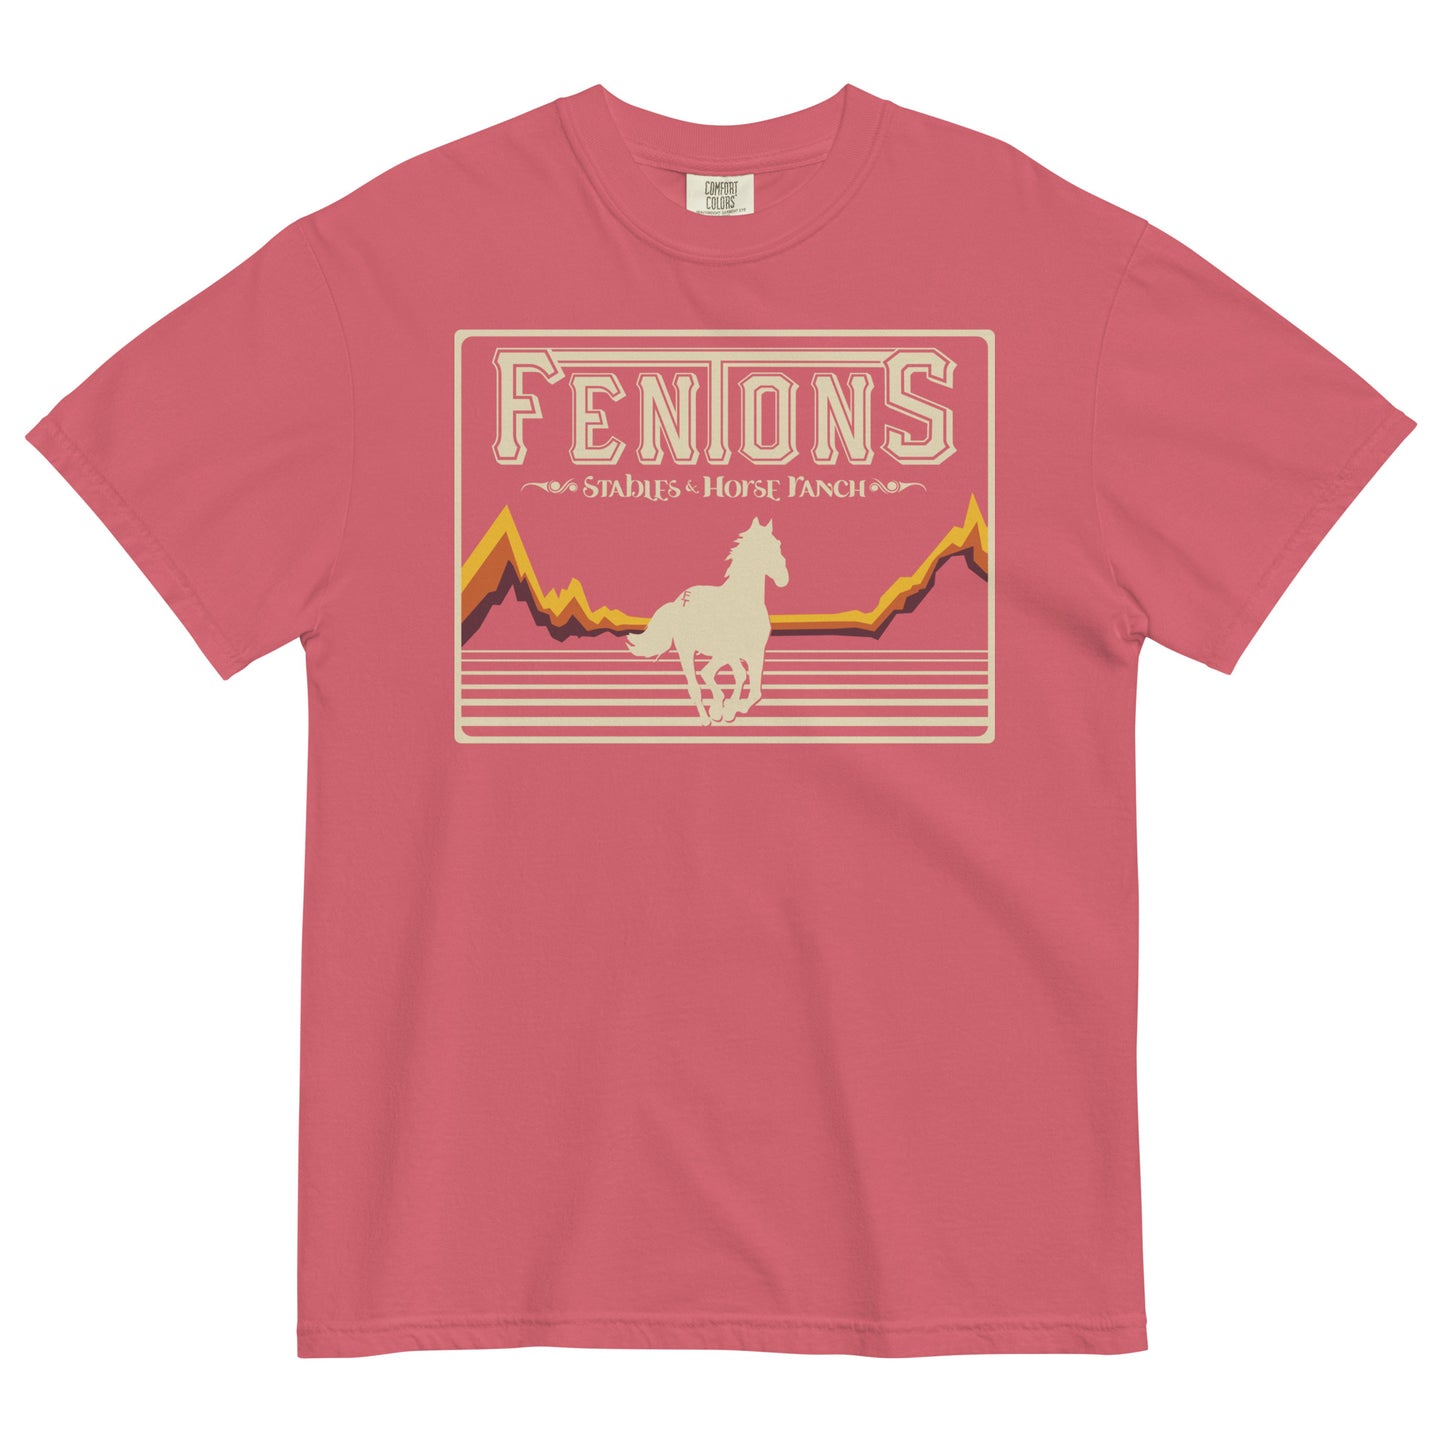 Fenton's Stables and Horse Ranch Unisex Comfort Colors T-shirt